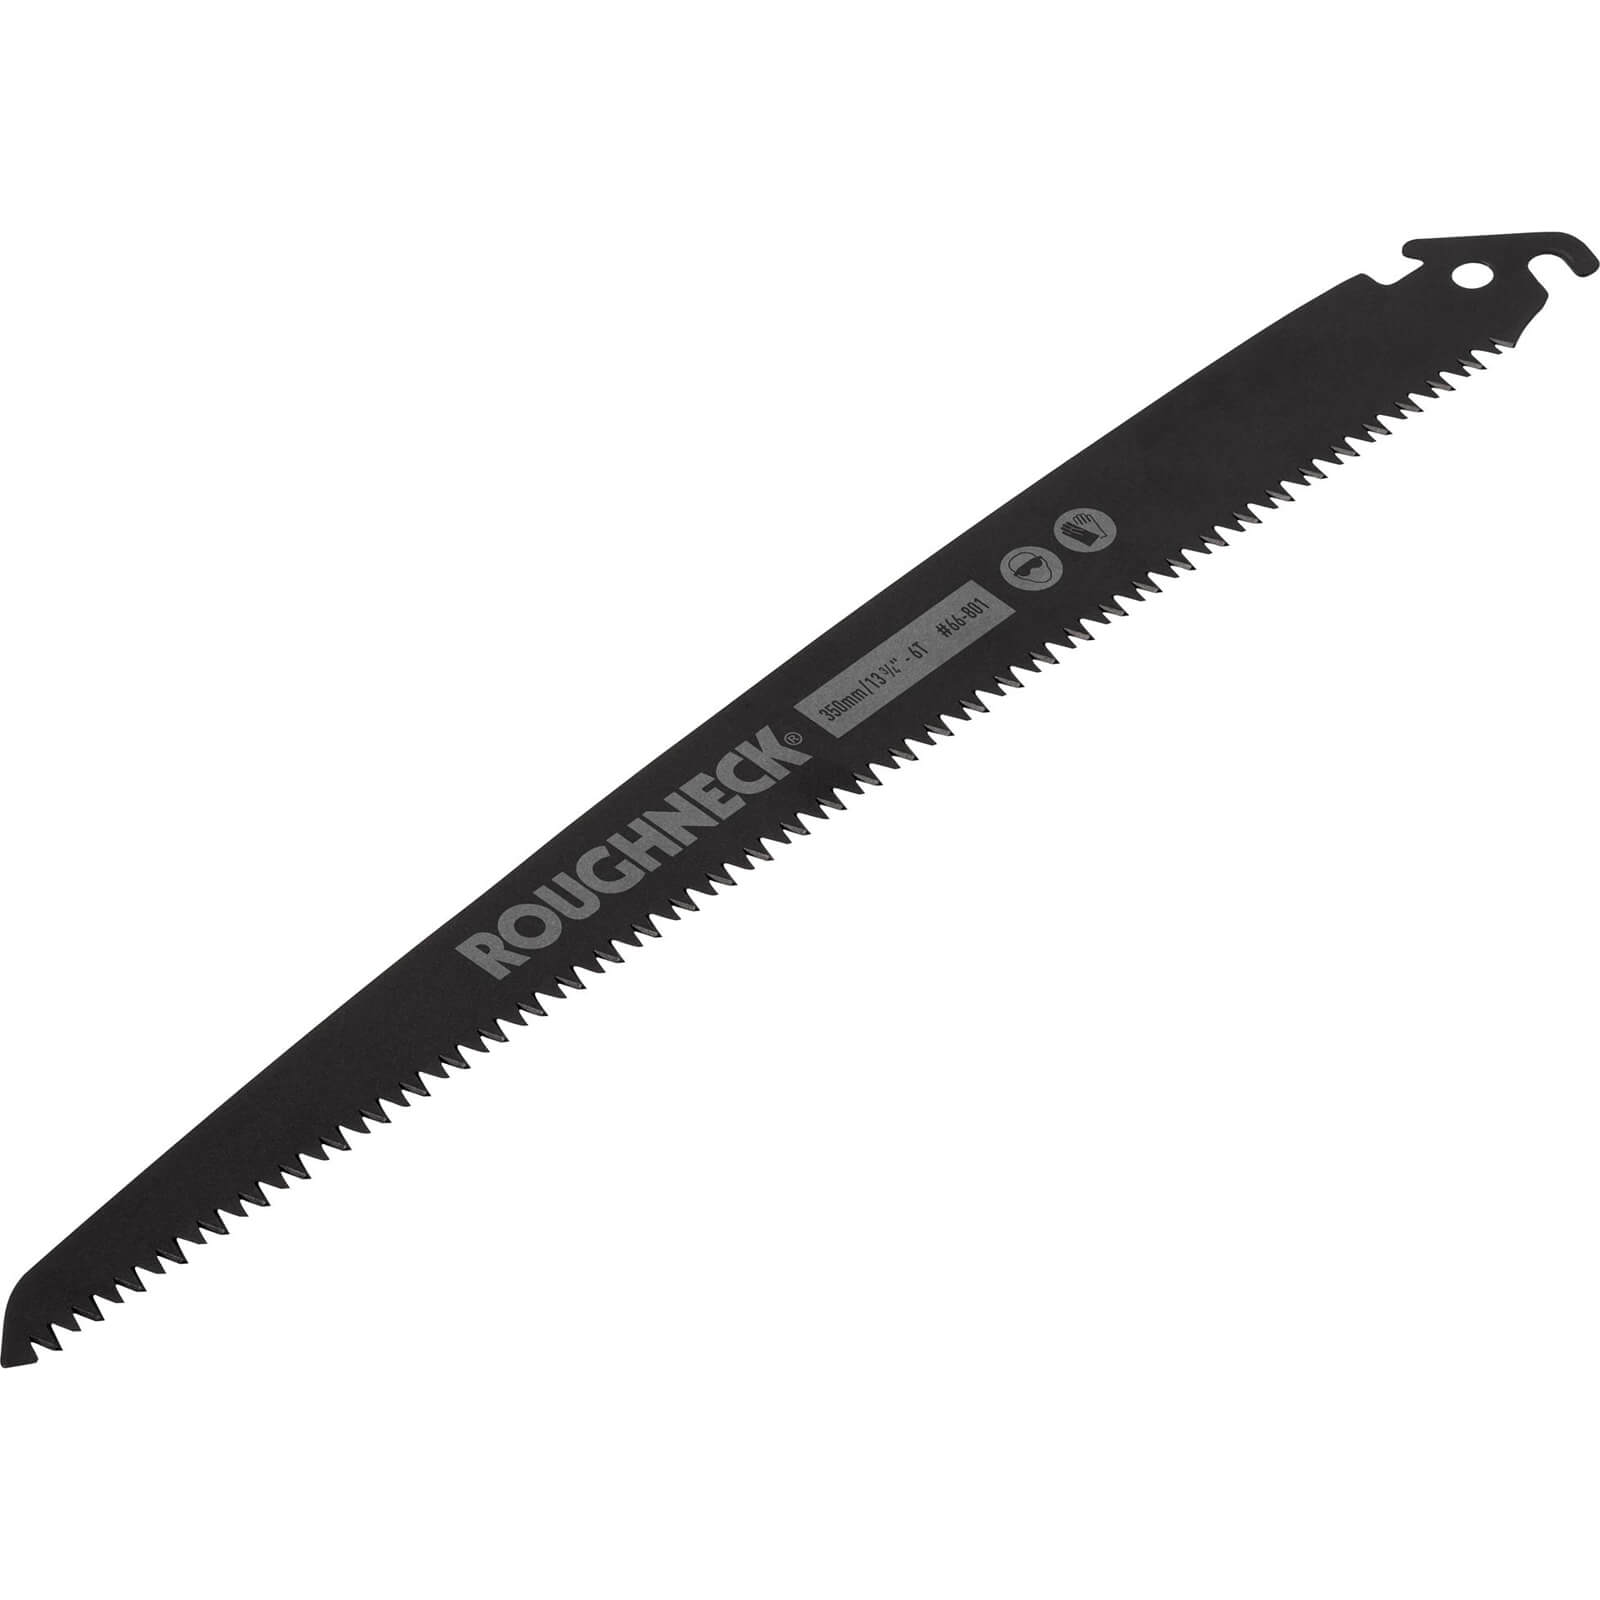 Image of Roughneck Replacement Blade For Gorilla 66800 Pruning Saw 350mm